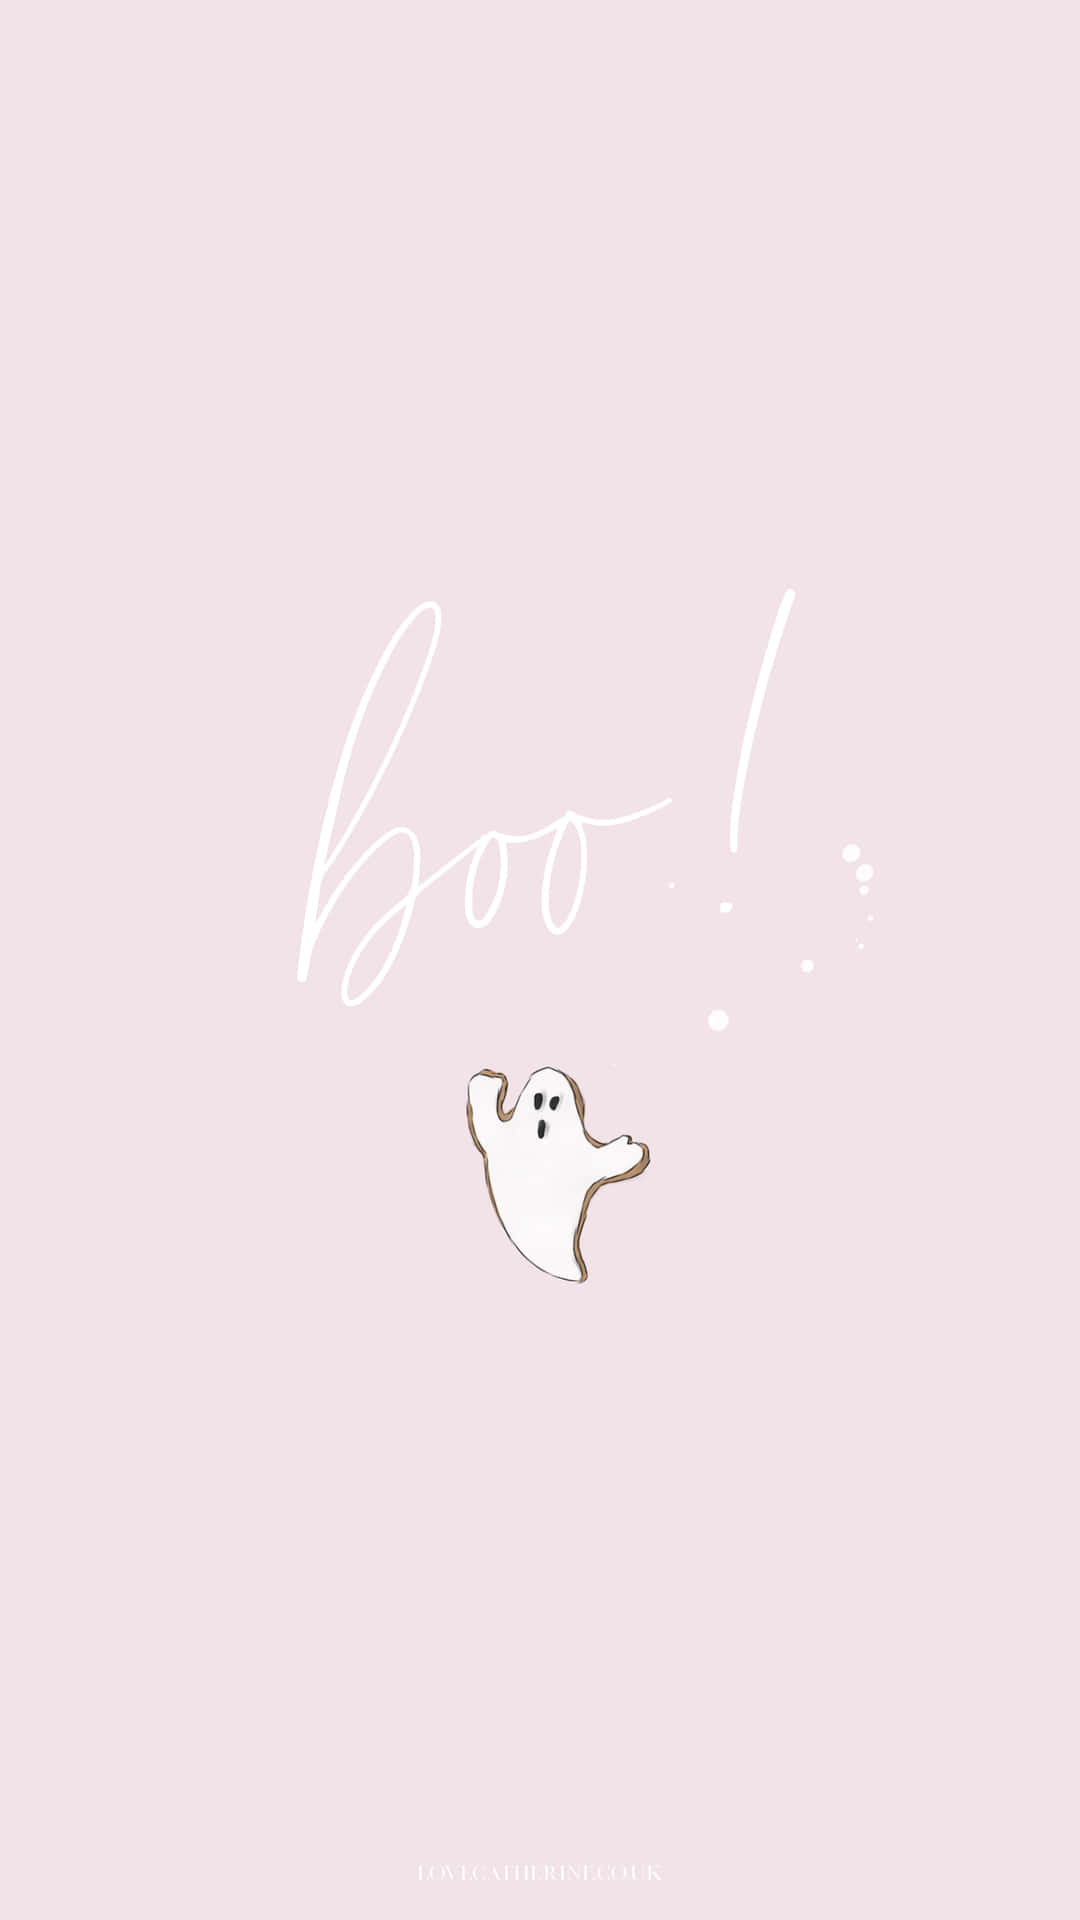 Ghost For A Cute Autumn Iphone Wallpaper